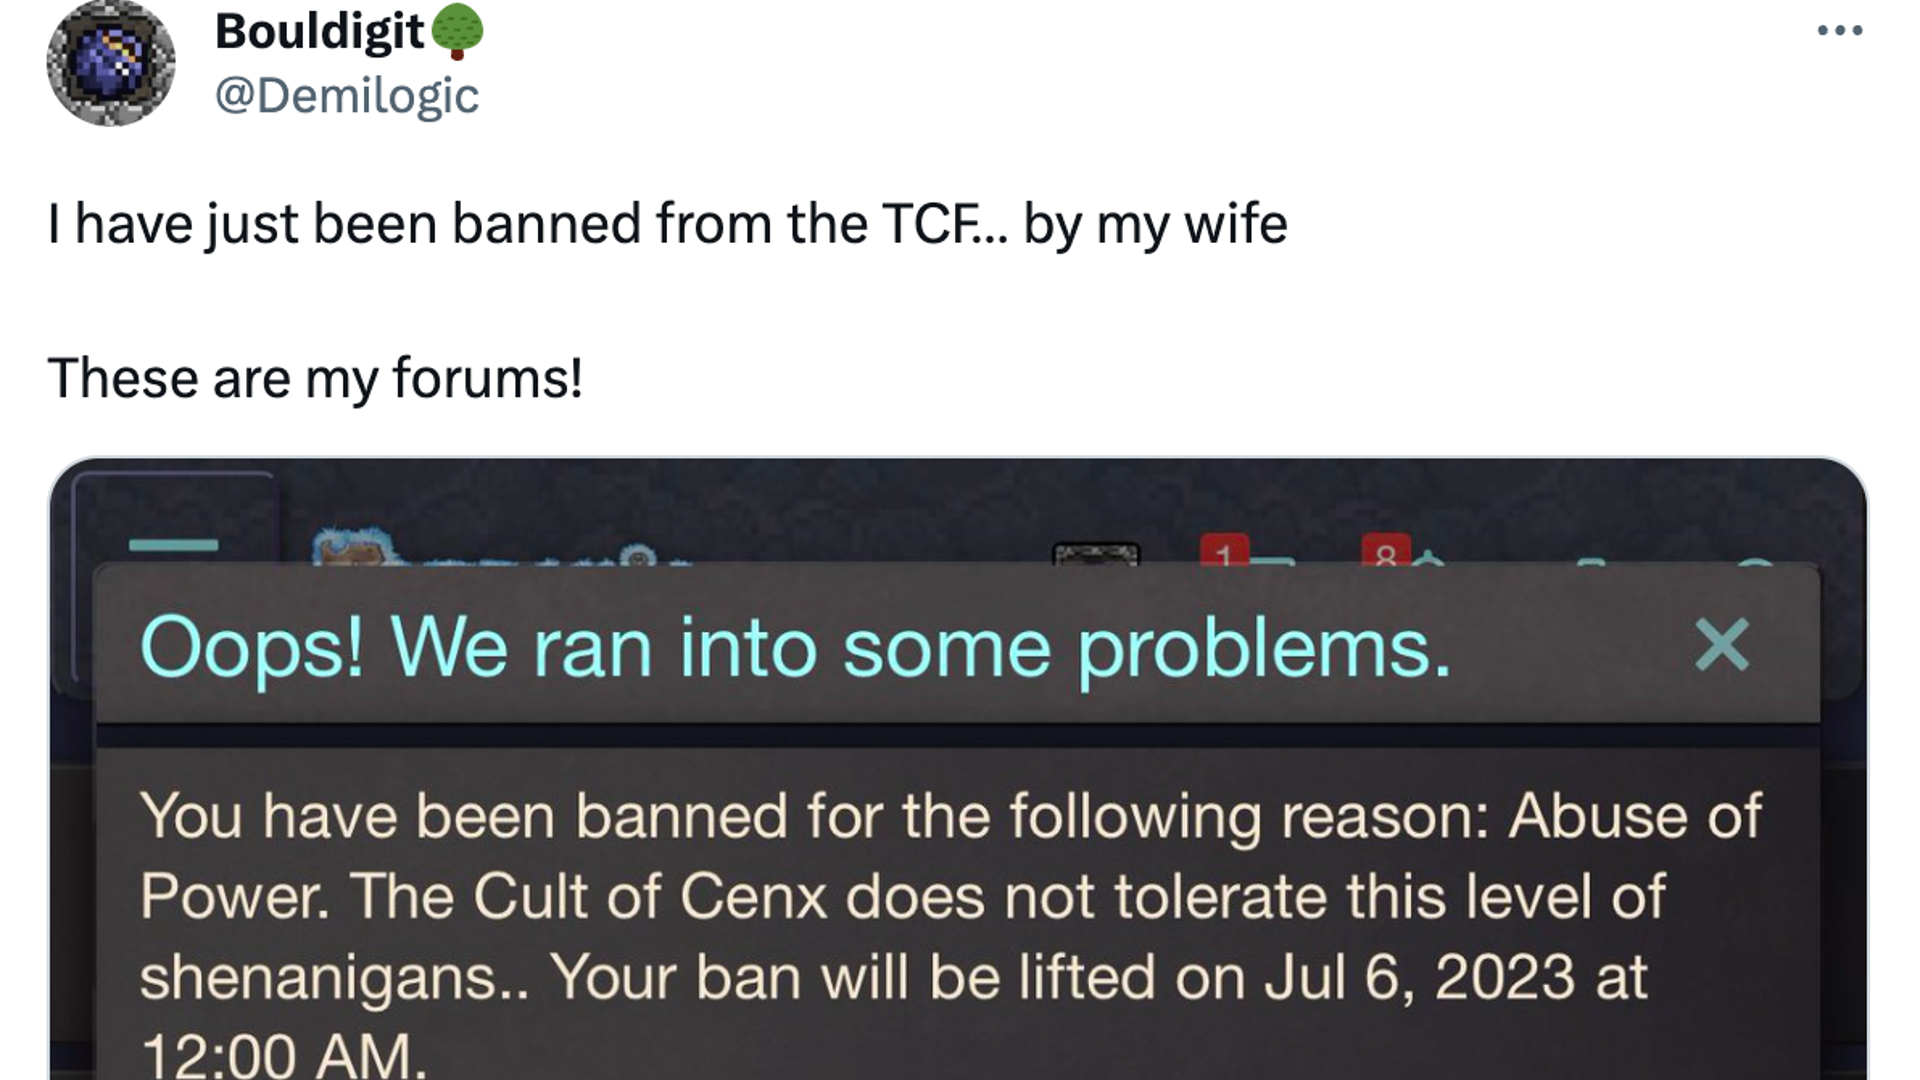 Redigit's post on Twitter showing his forum ban